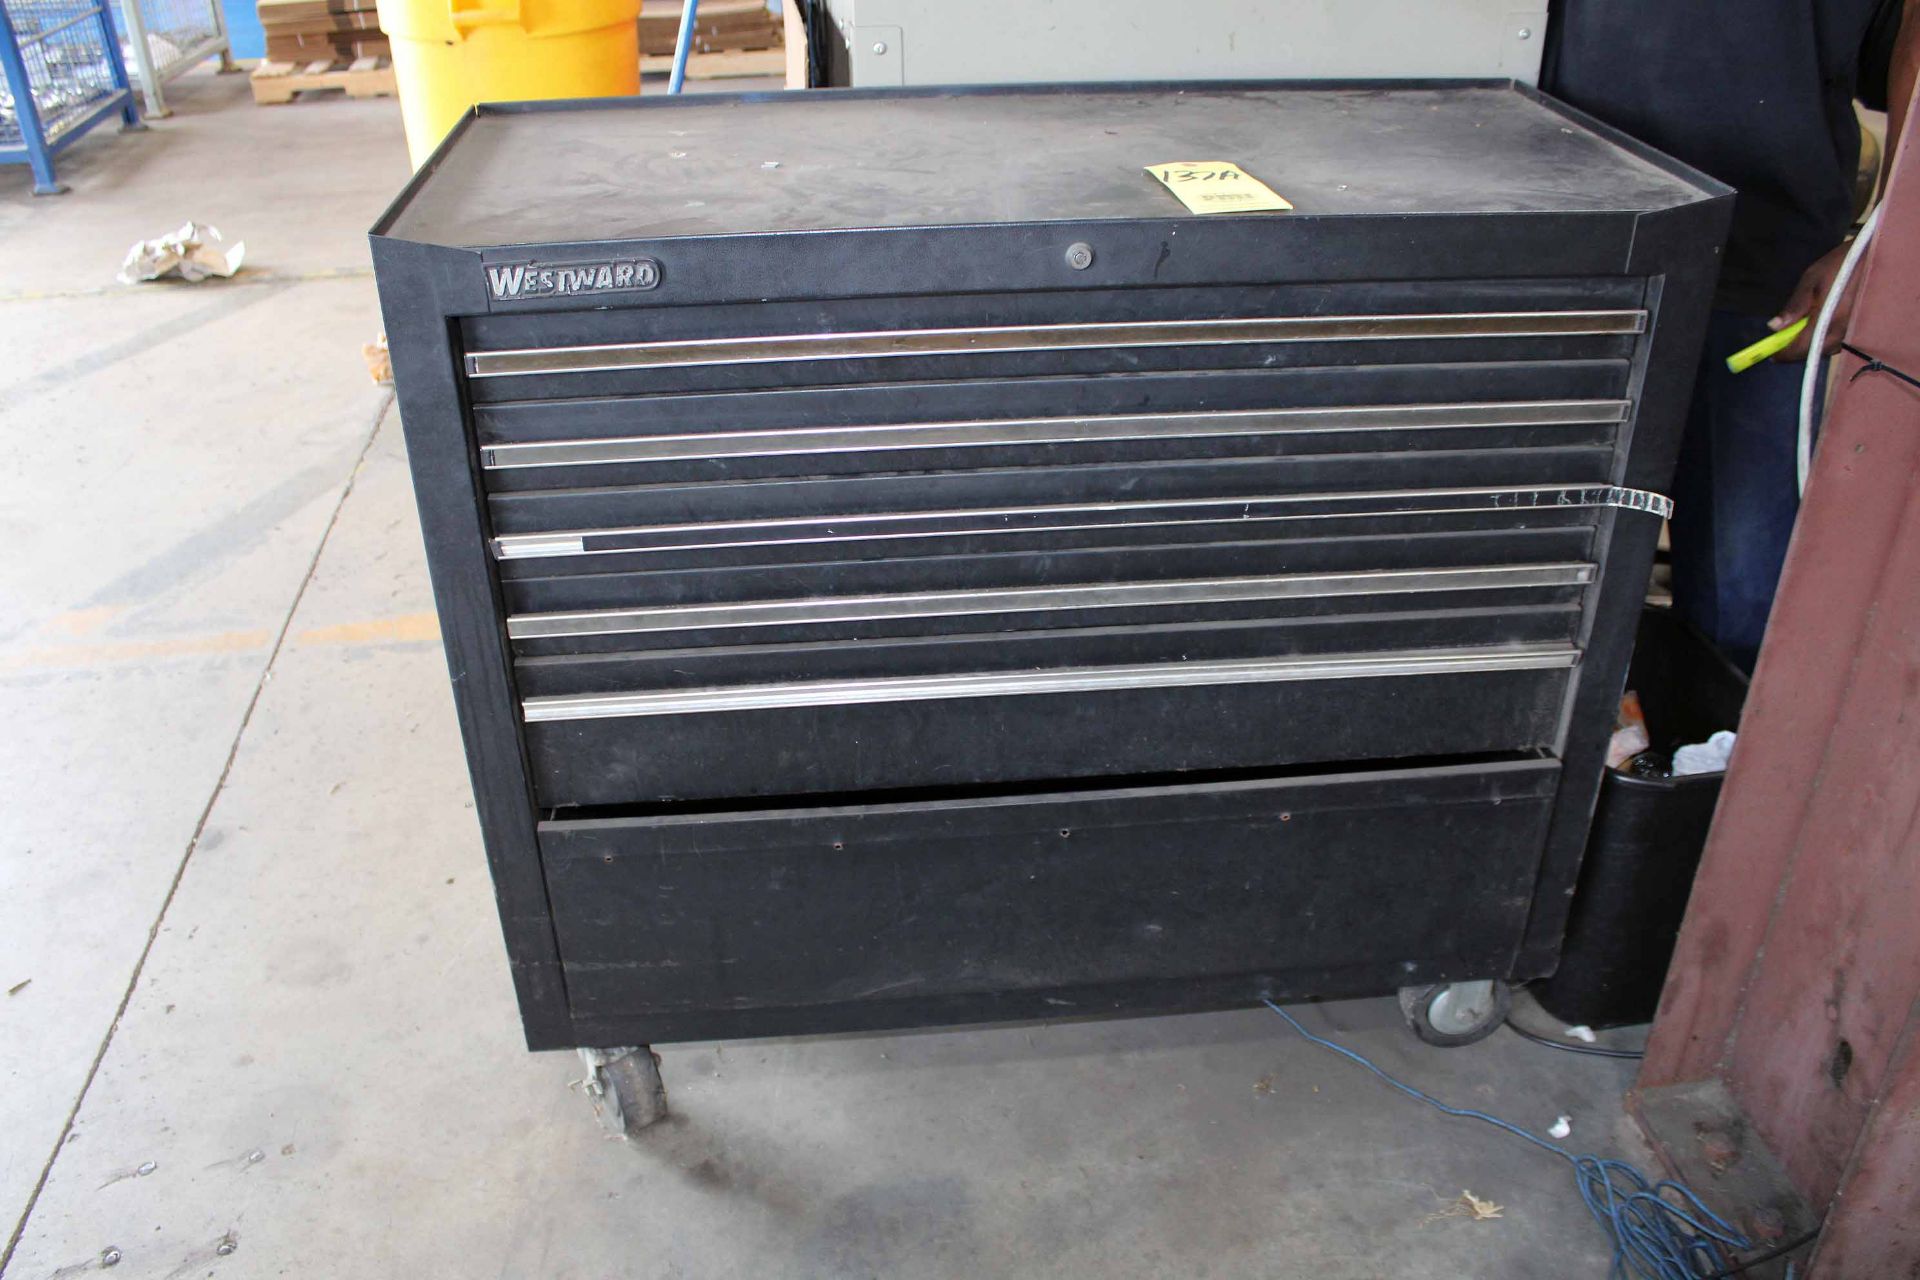 TOOL BOX, WESTWARD, w/ casters, 5-drawer, 18" x 42" x 39"ht. (Located at: Emco Wheaton USA, Inc.,